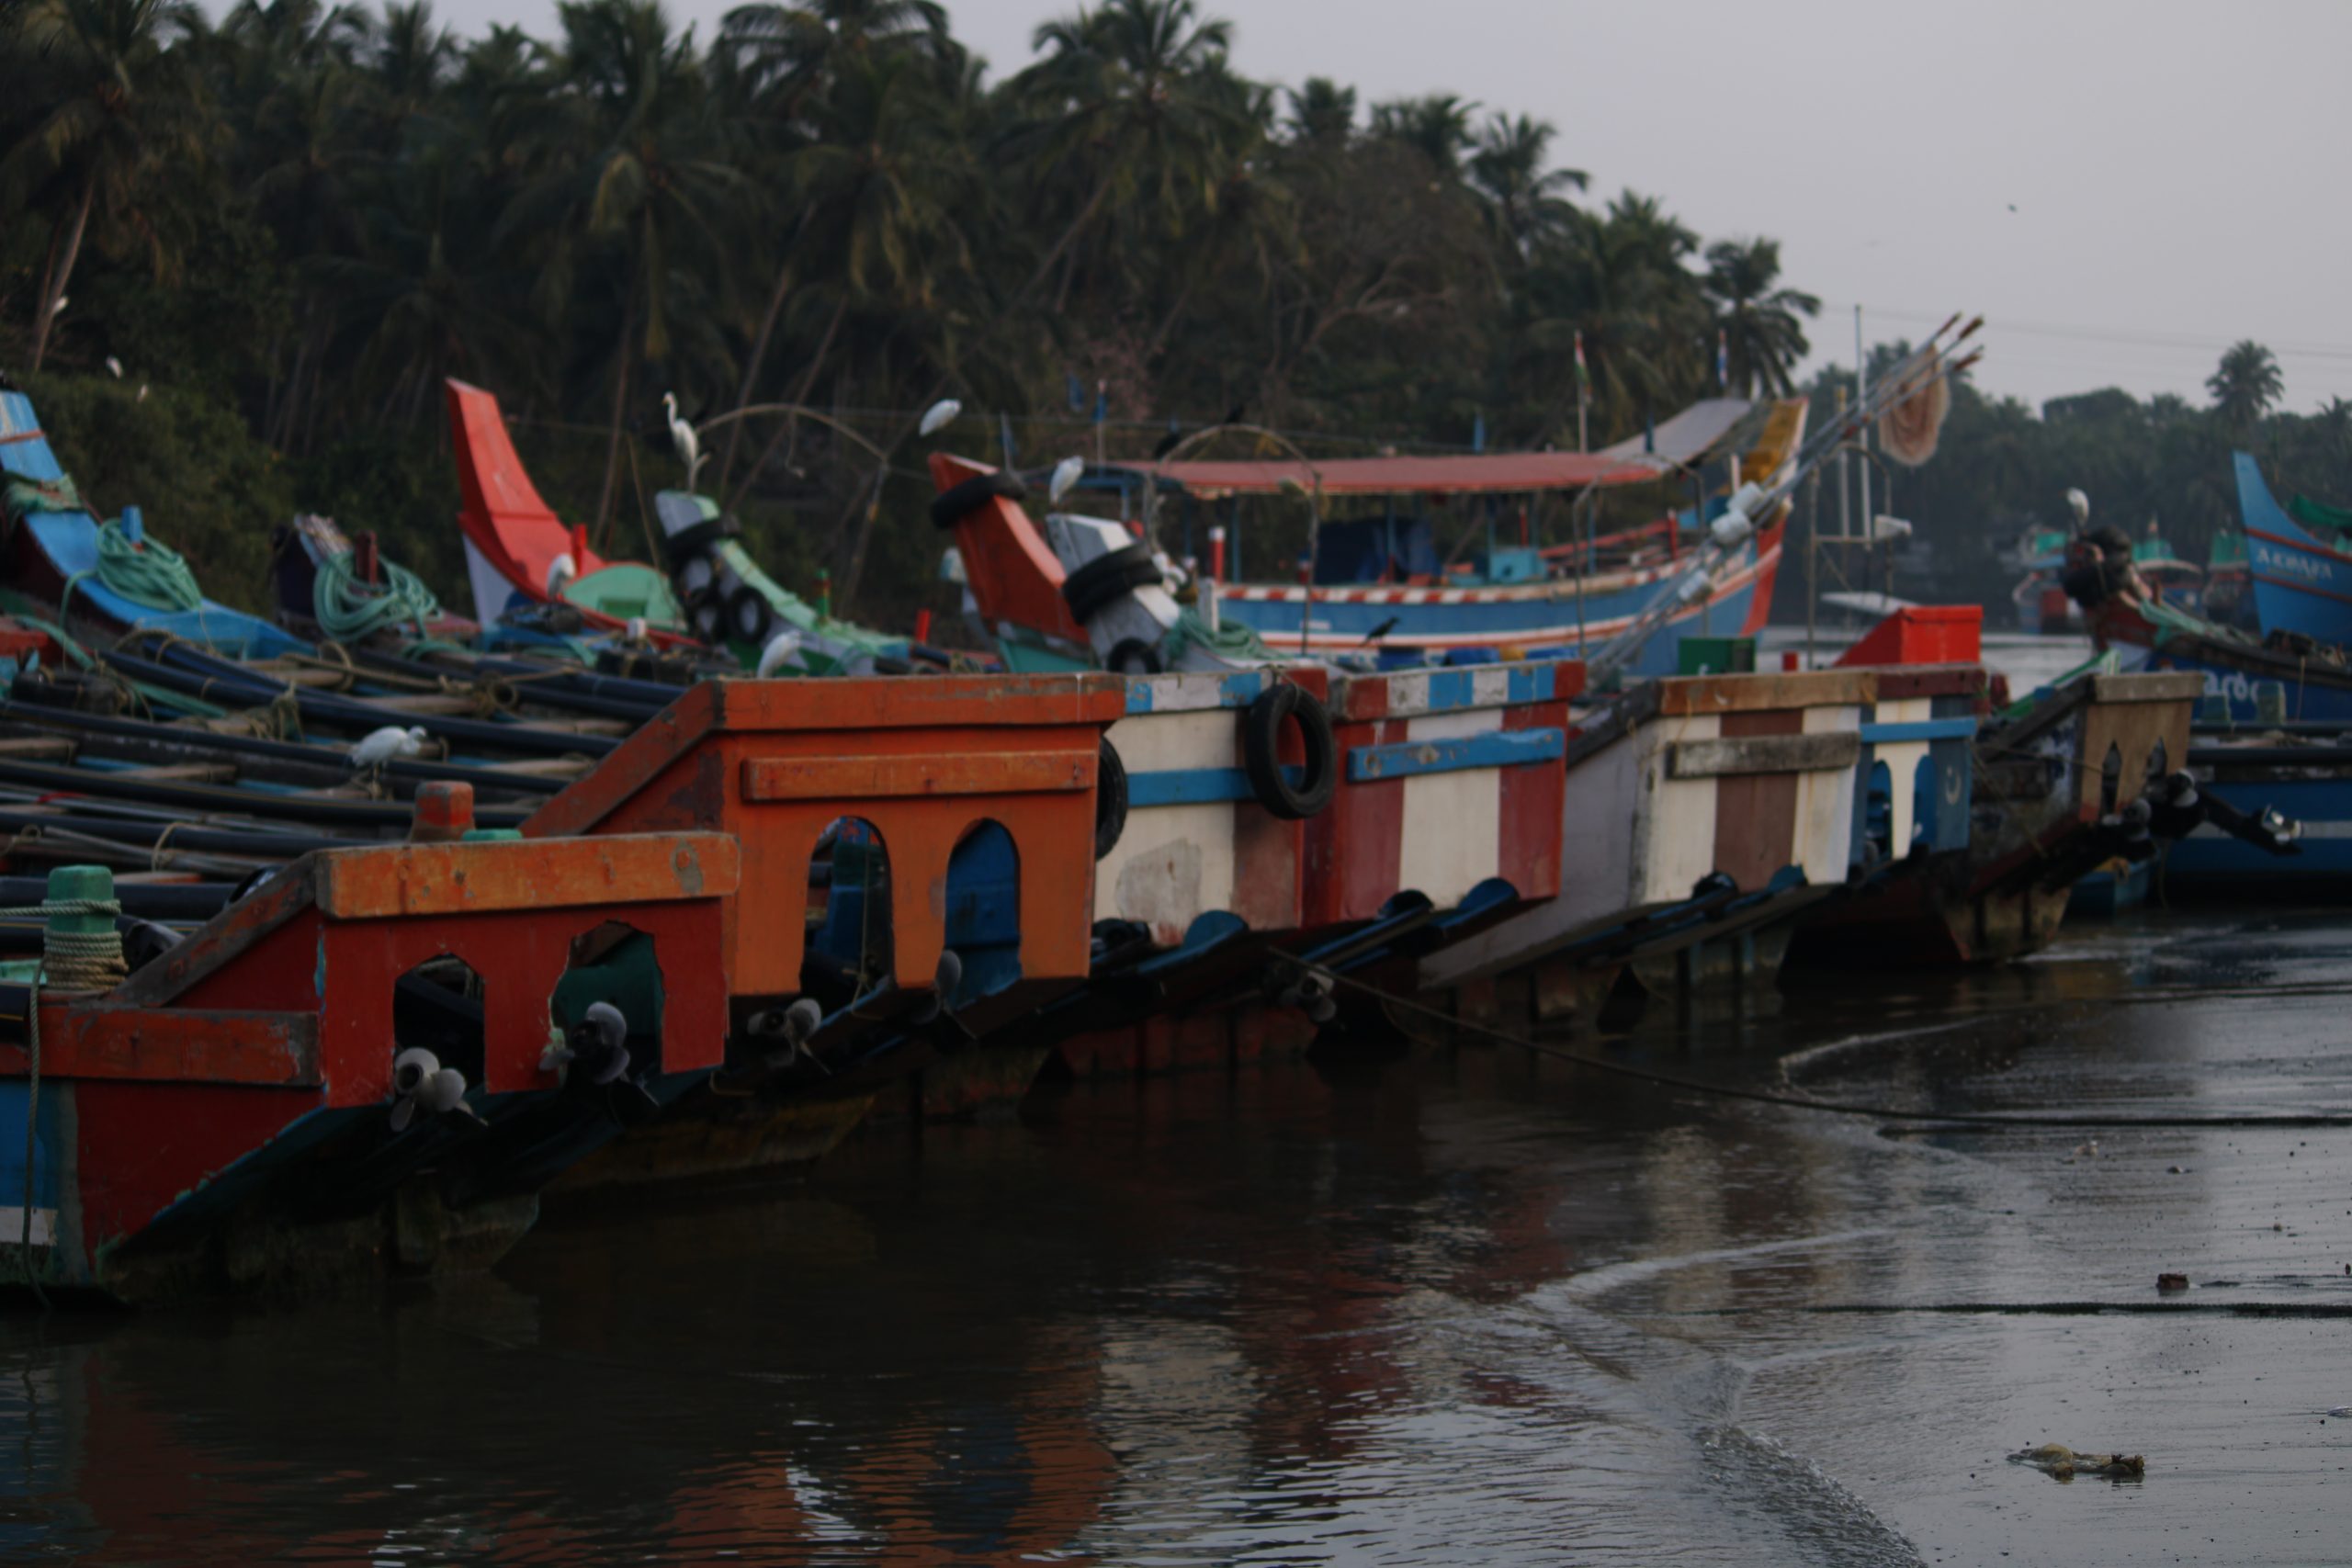 Fishing boats parked at seaside.